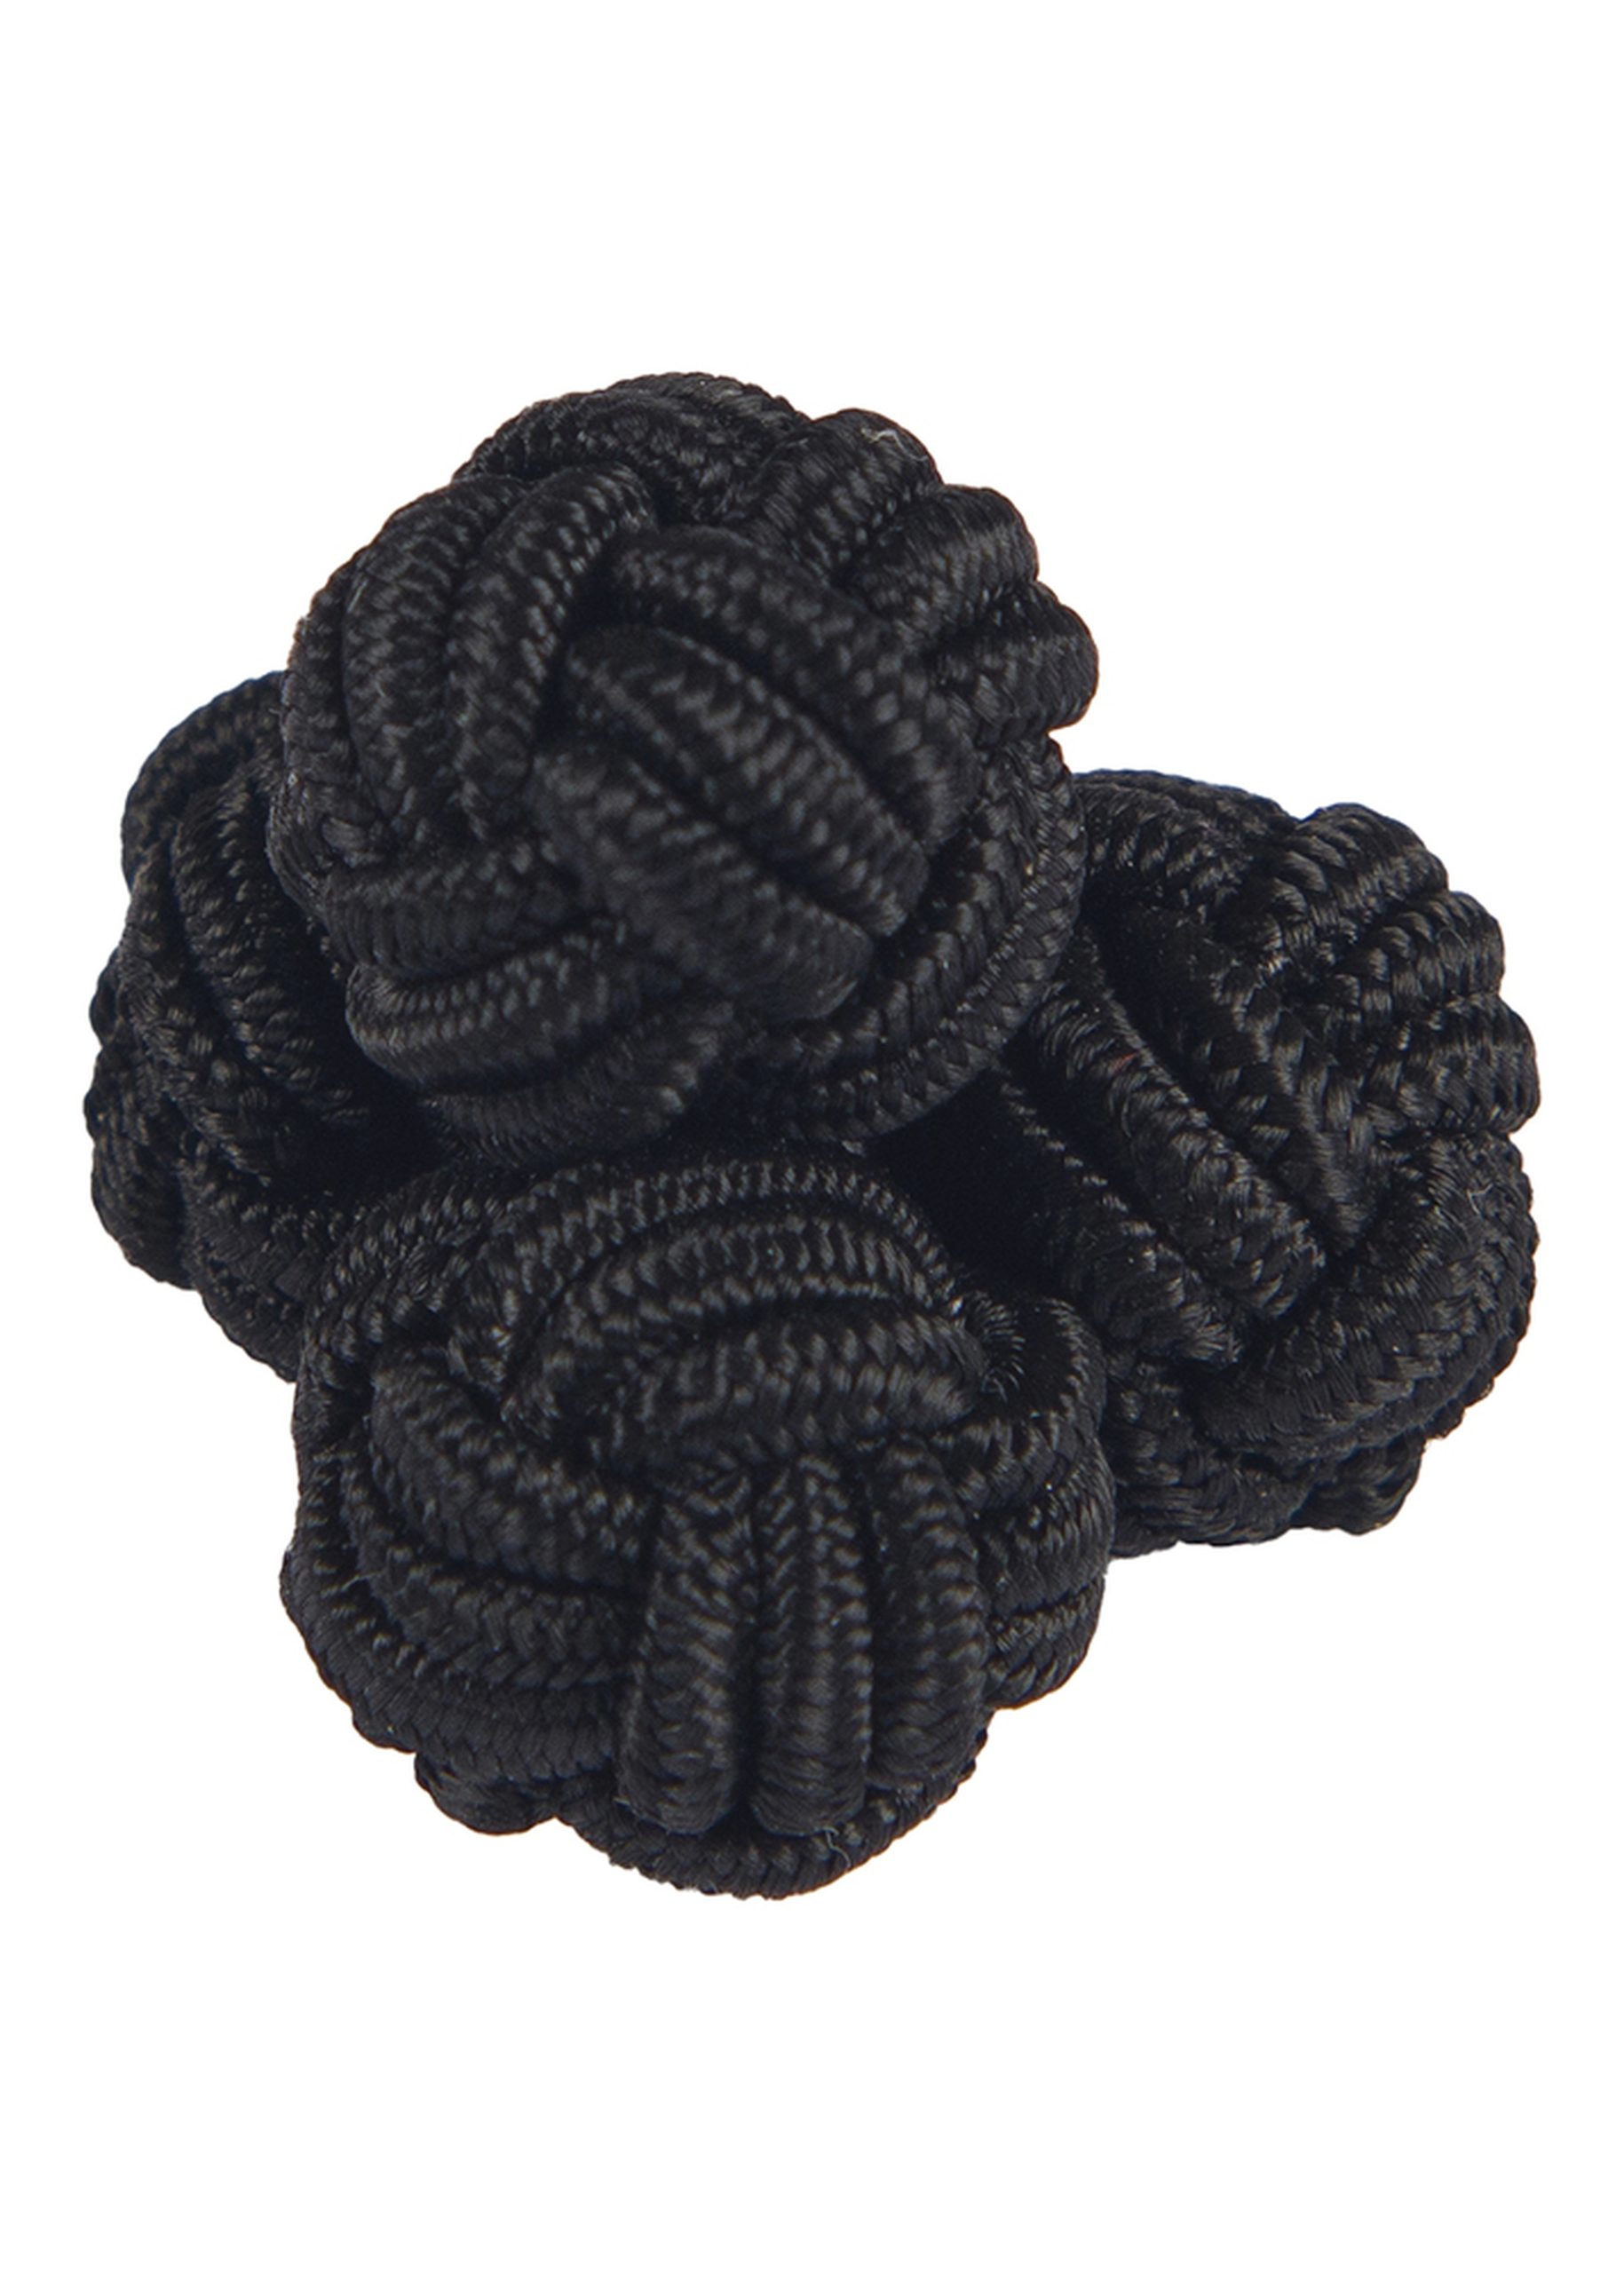 Roderick Charles silk knot in black